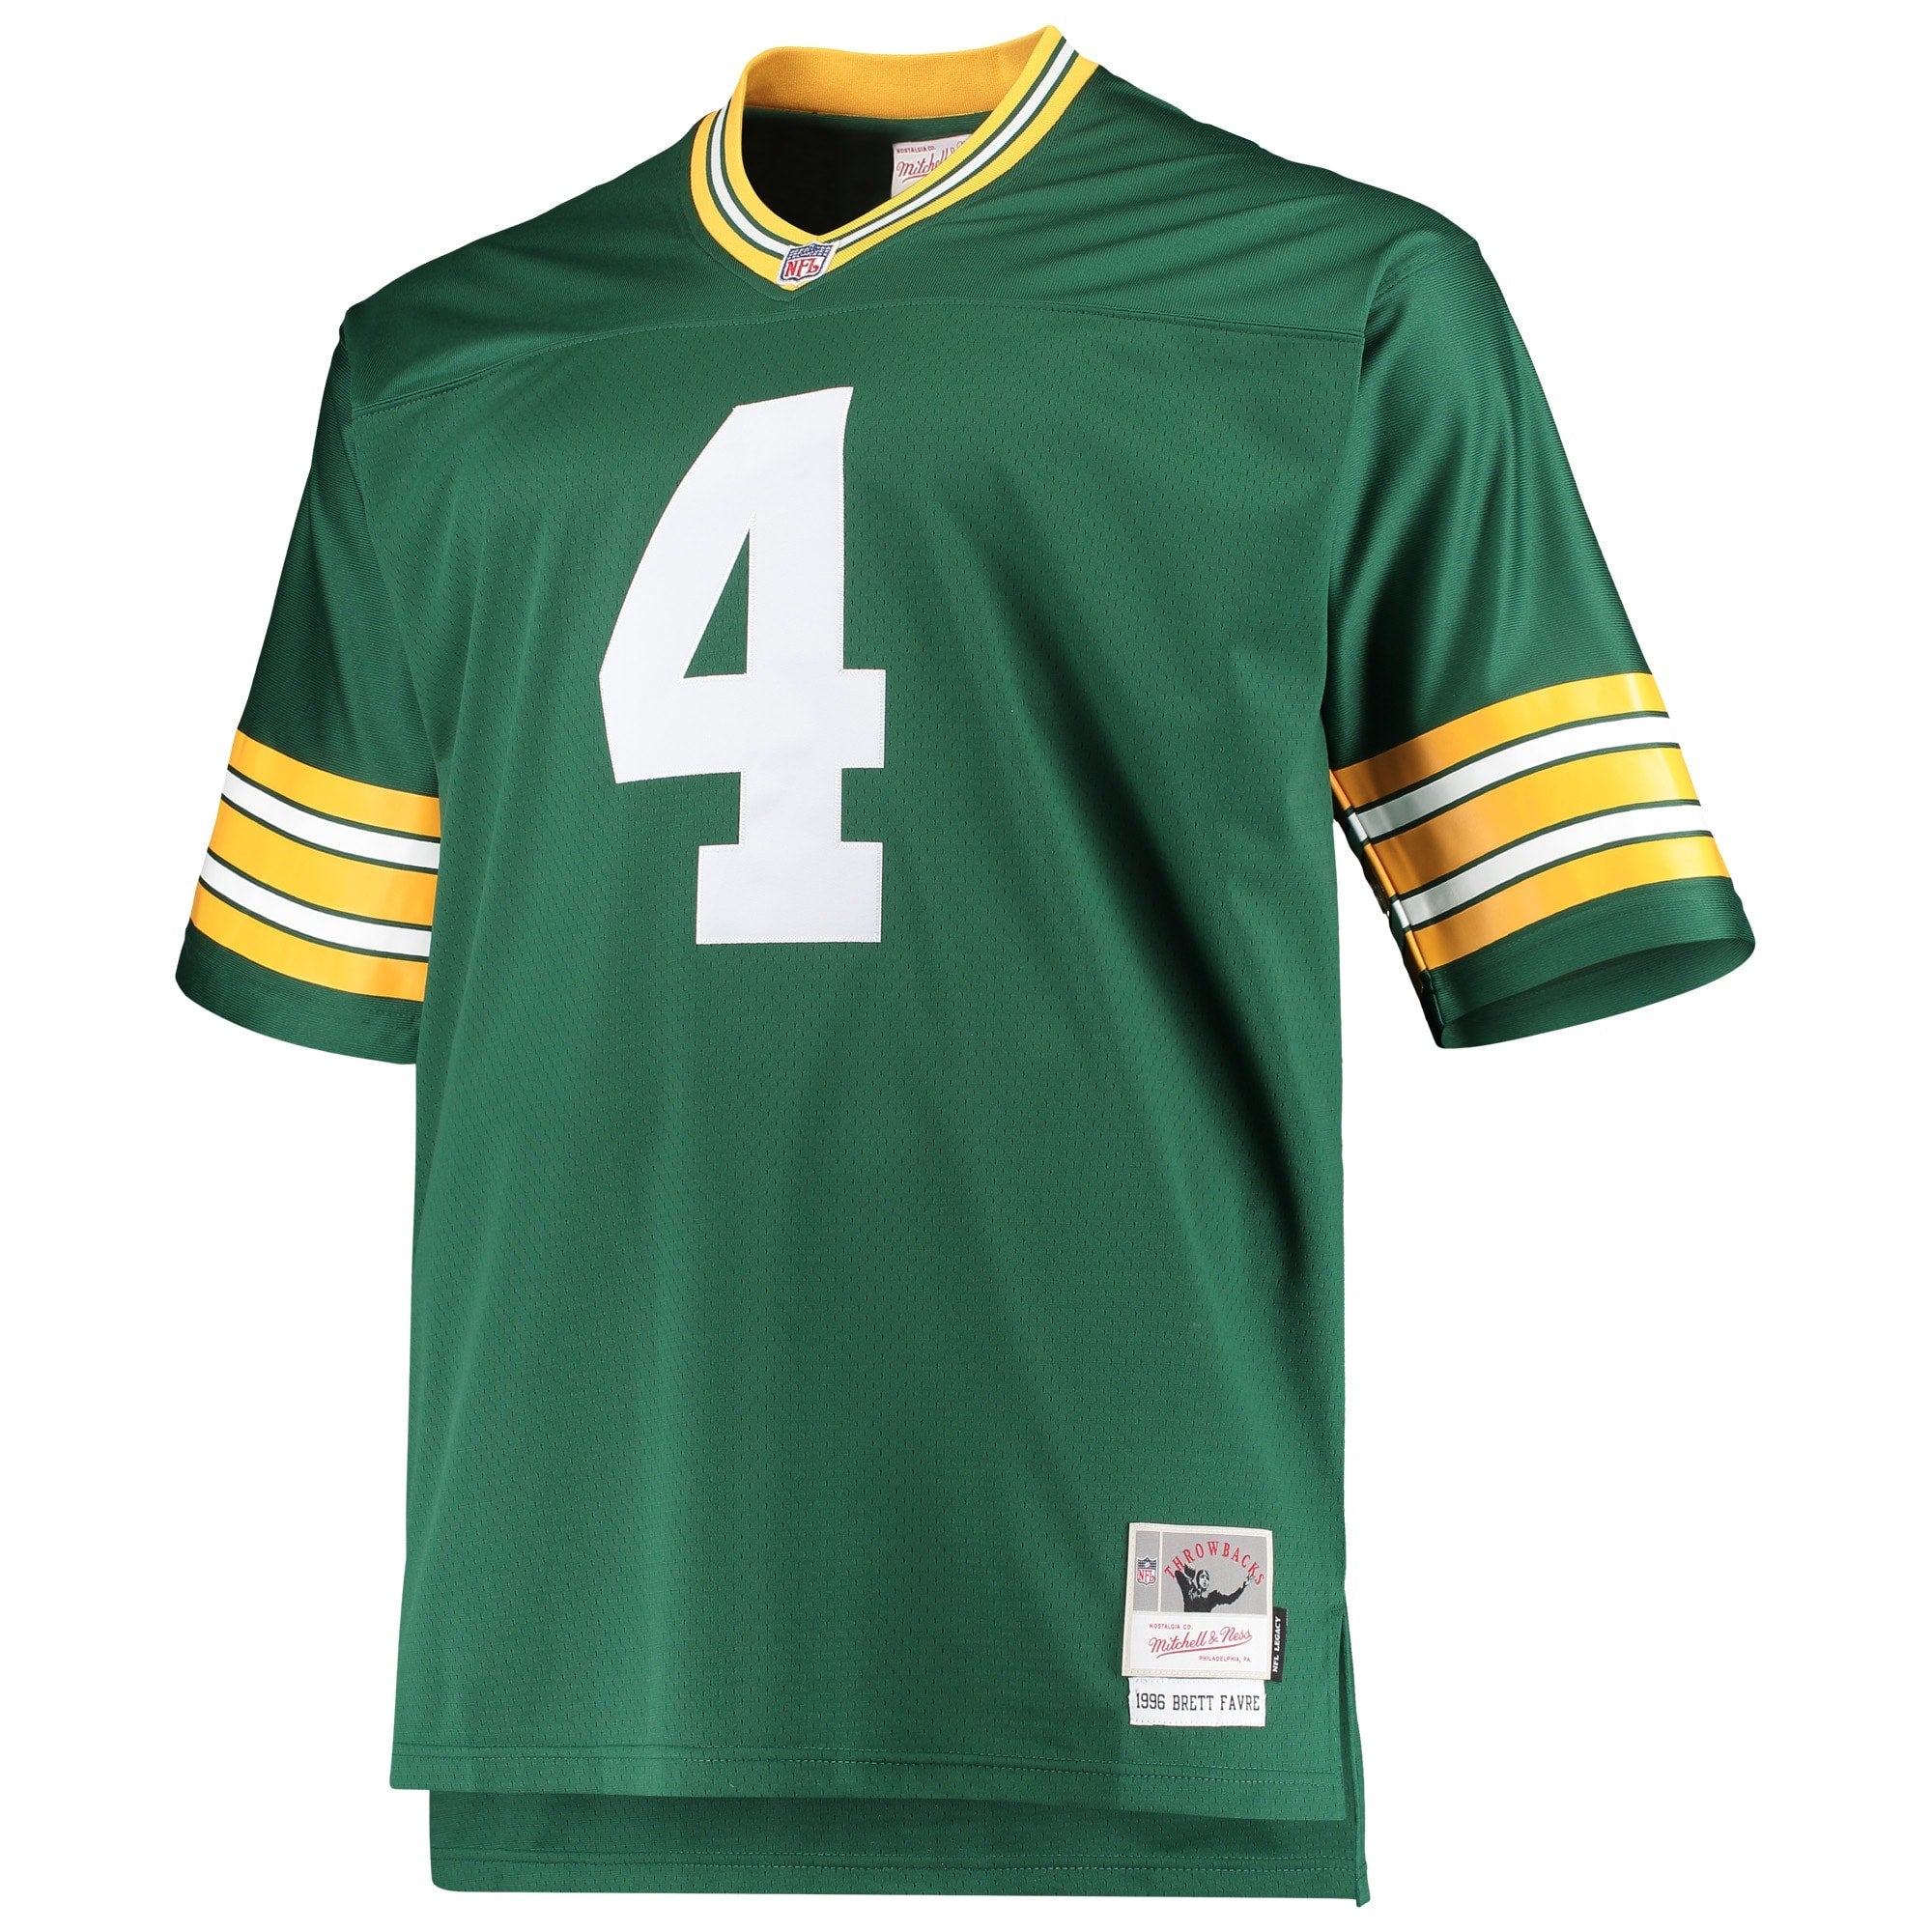 Mitchell and Ness Favre Packers Jersey Shirts (Green)